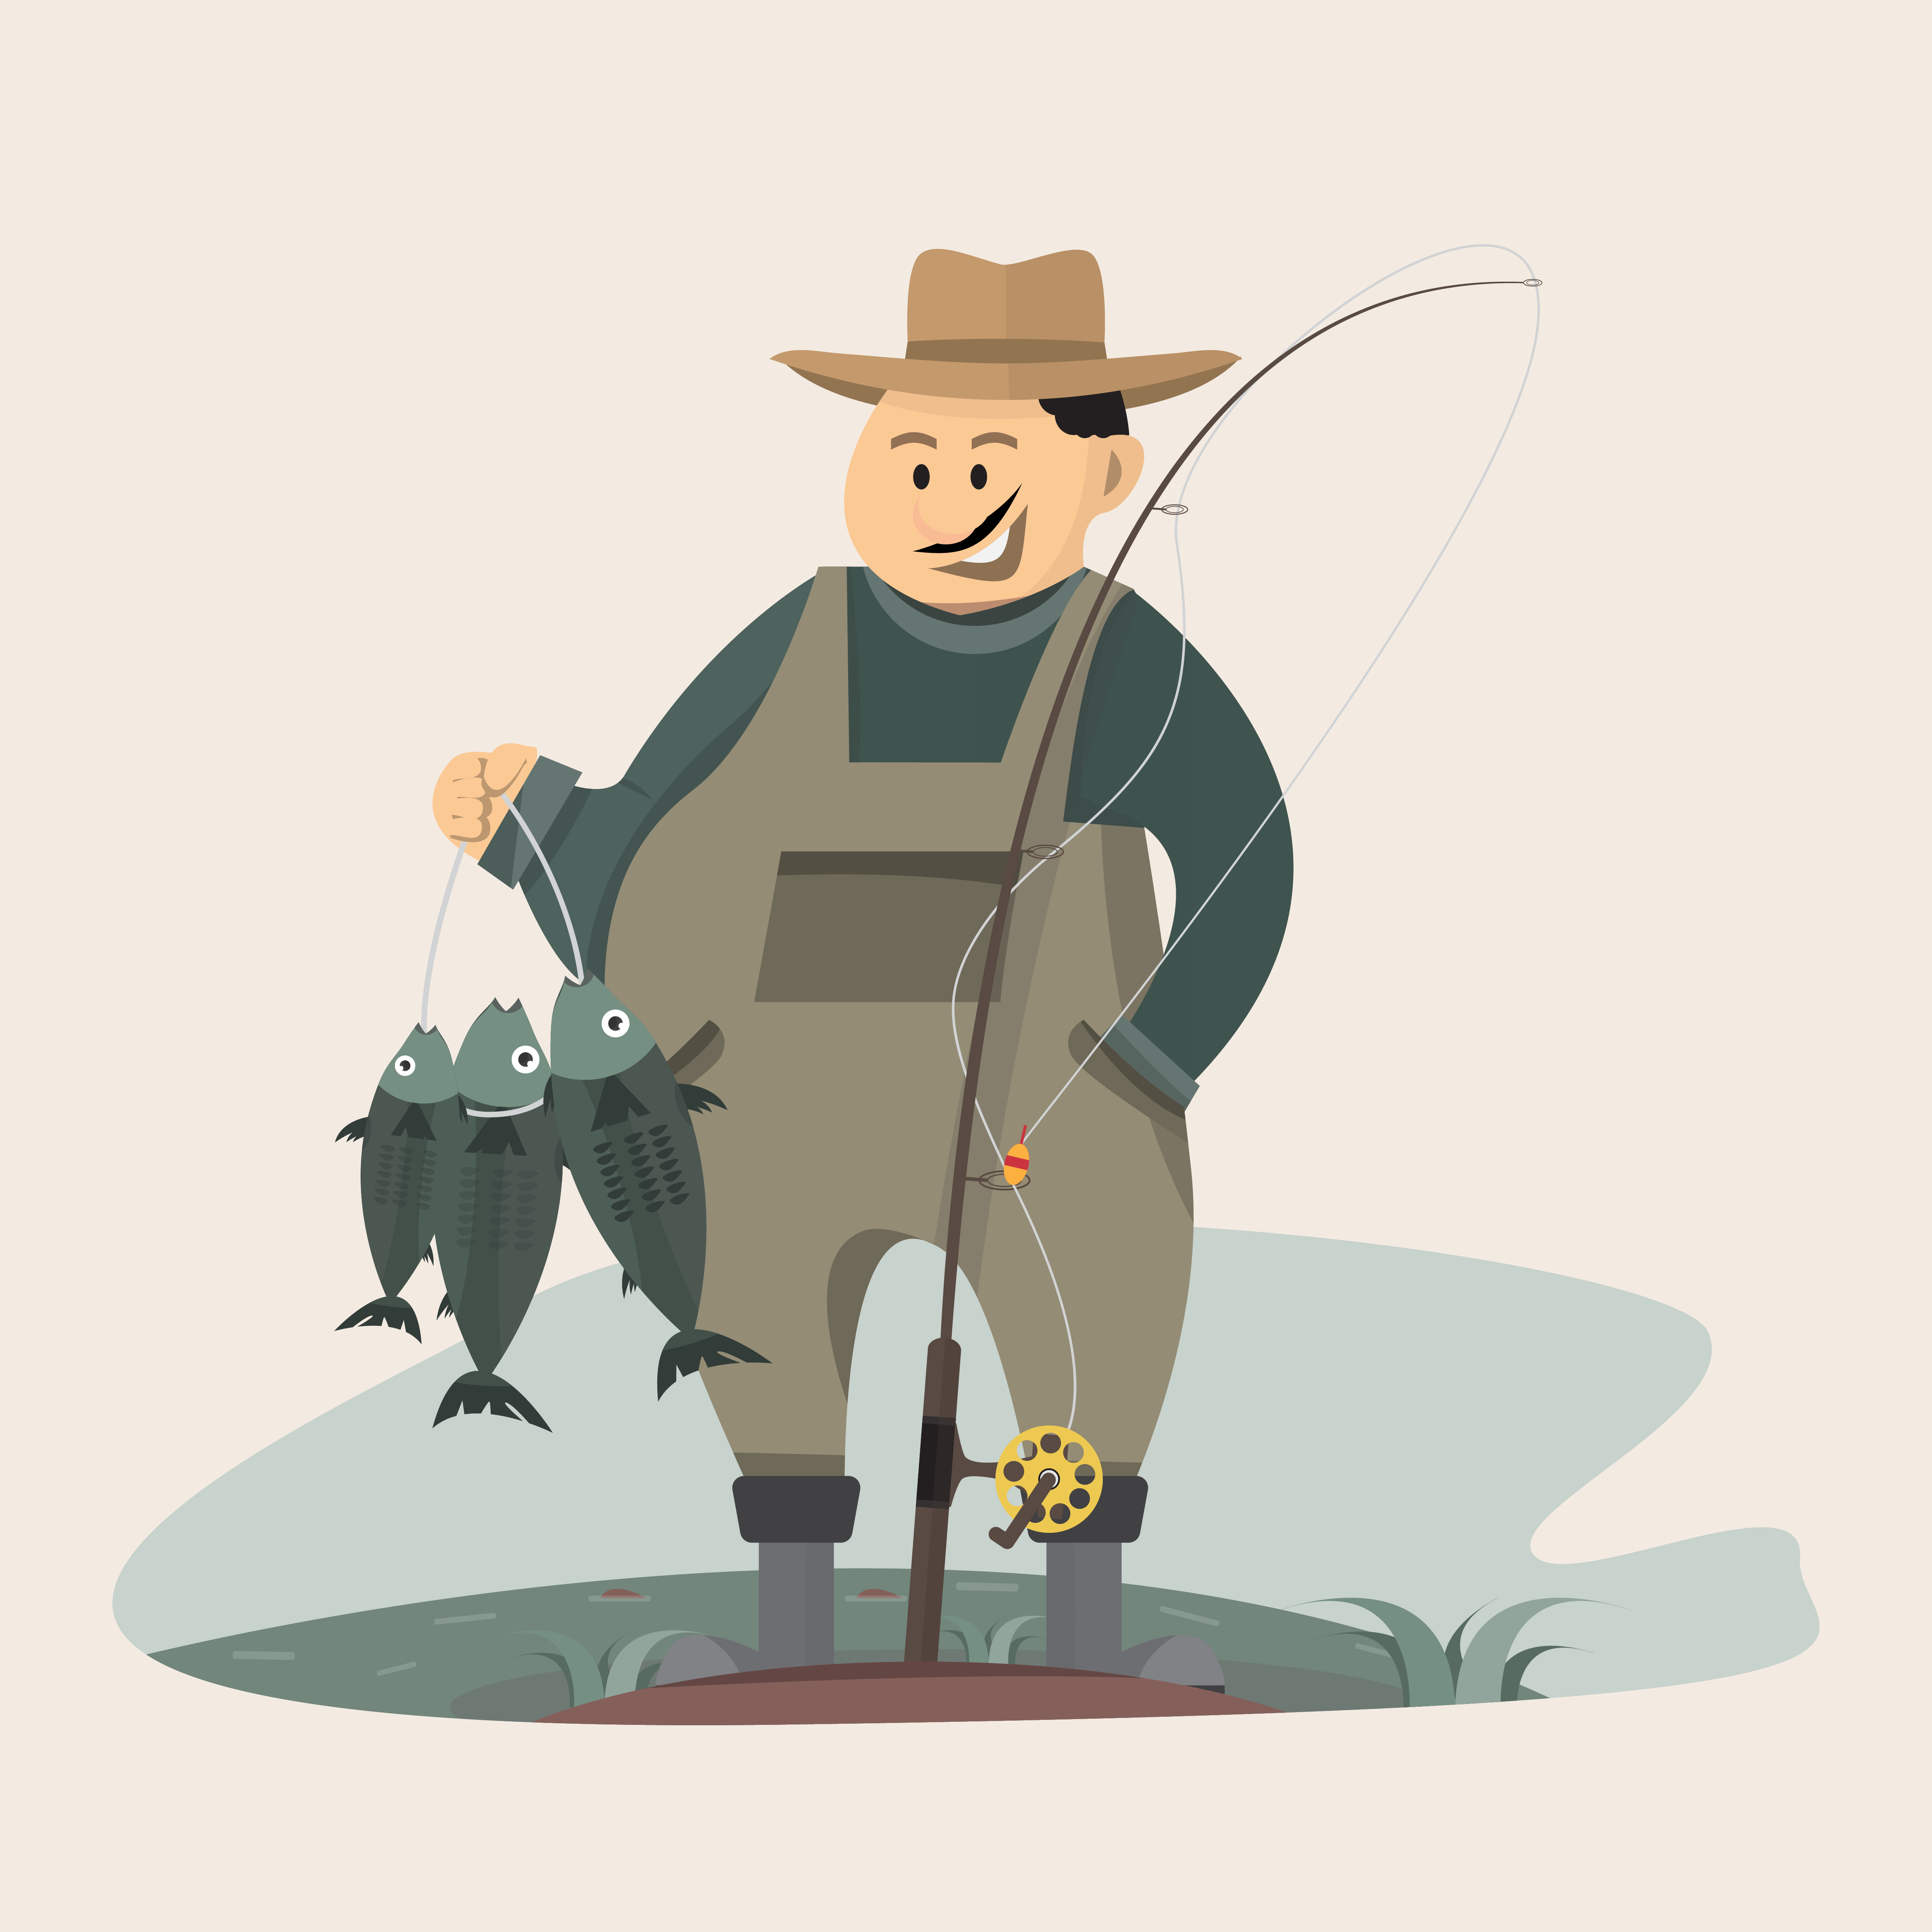 https://static.vecteezy.com/system/resources/previews/000/425/424/original/vector-fisherman-character-holding-a-big-fish-and-a-fishing-rod-with-lake-and-river-landscape.jpg